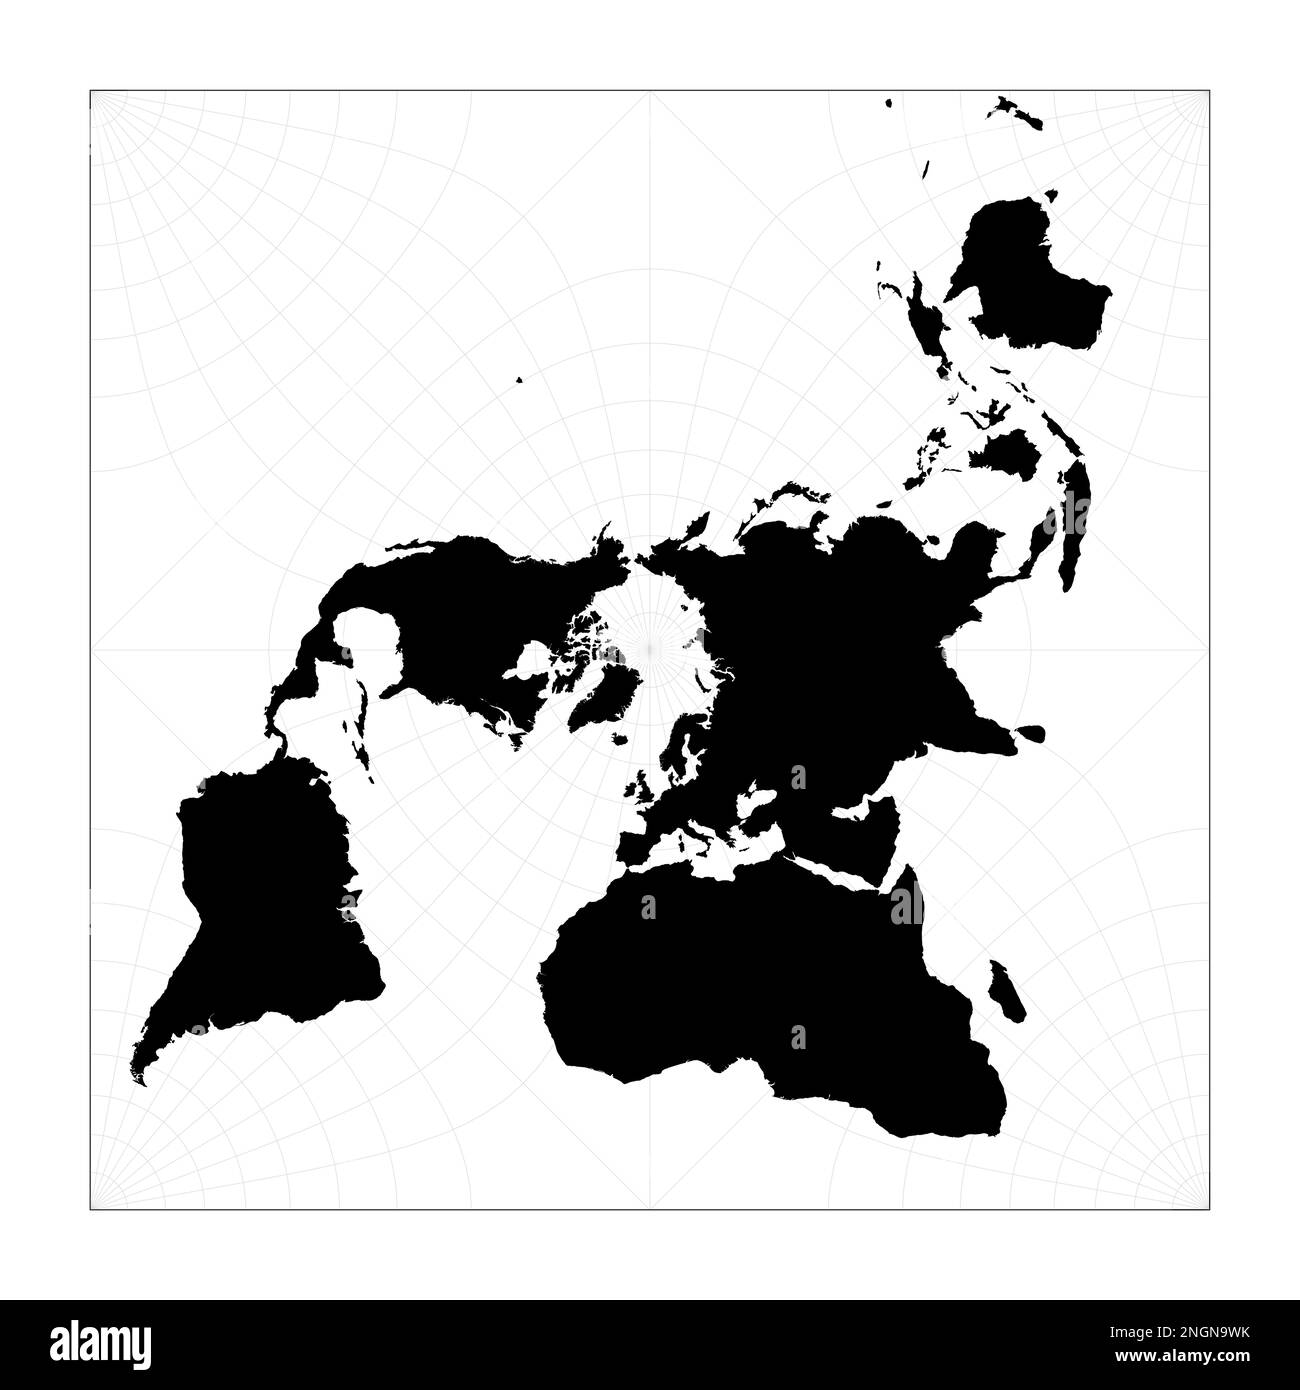 Black world map on white background. Peirce quincuncial projection. Plan world geographical map with graticlue lines. Vector illustration. Stock Vector